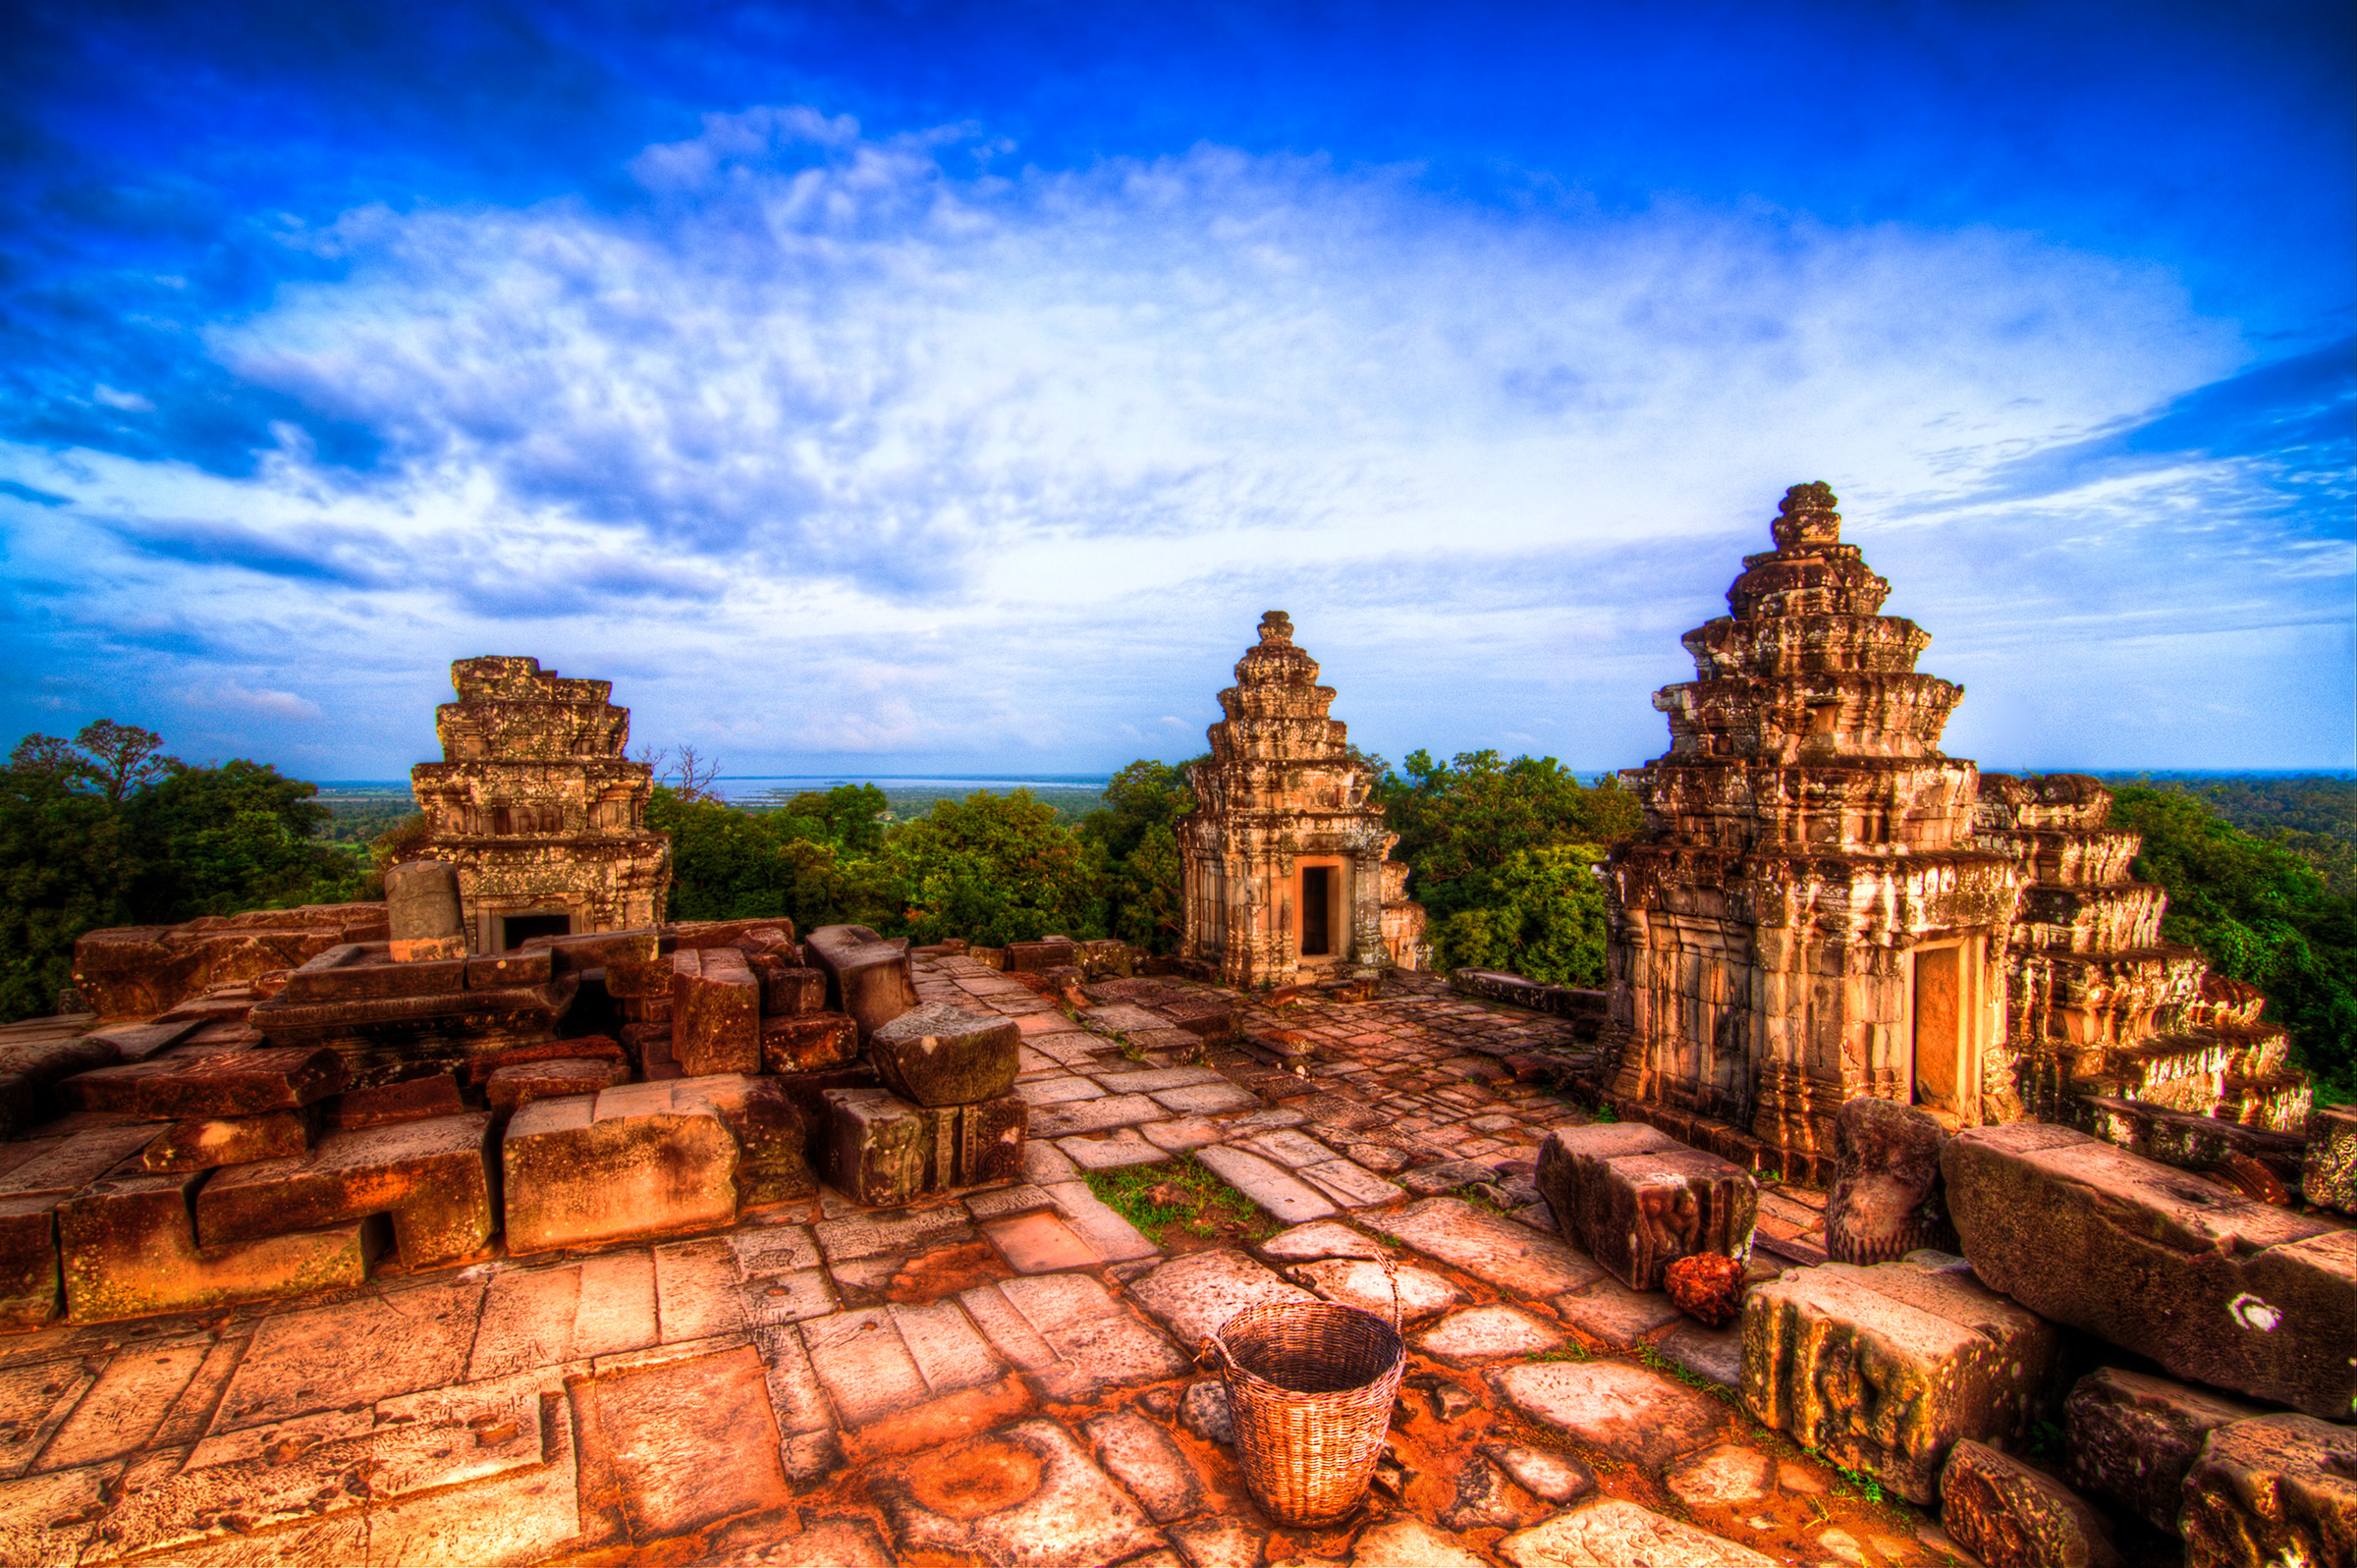 Aerial view of Phnom Bakheng, a temple in Siem Reap, Cambodia